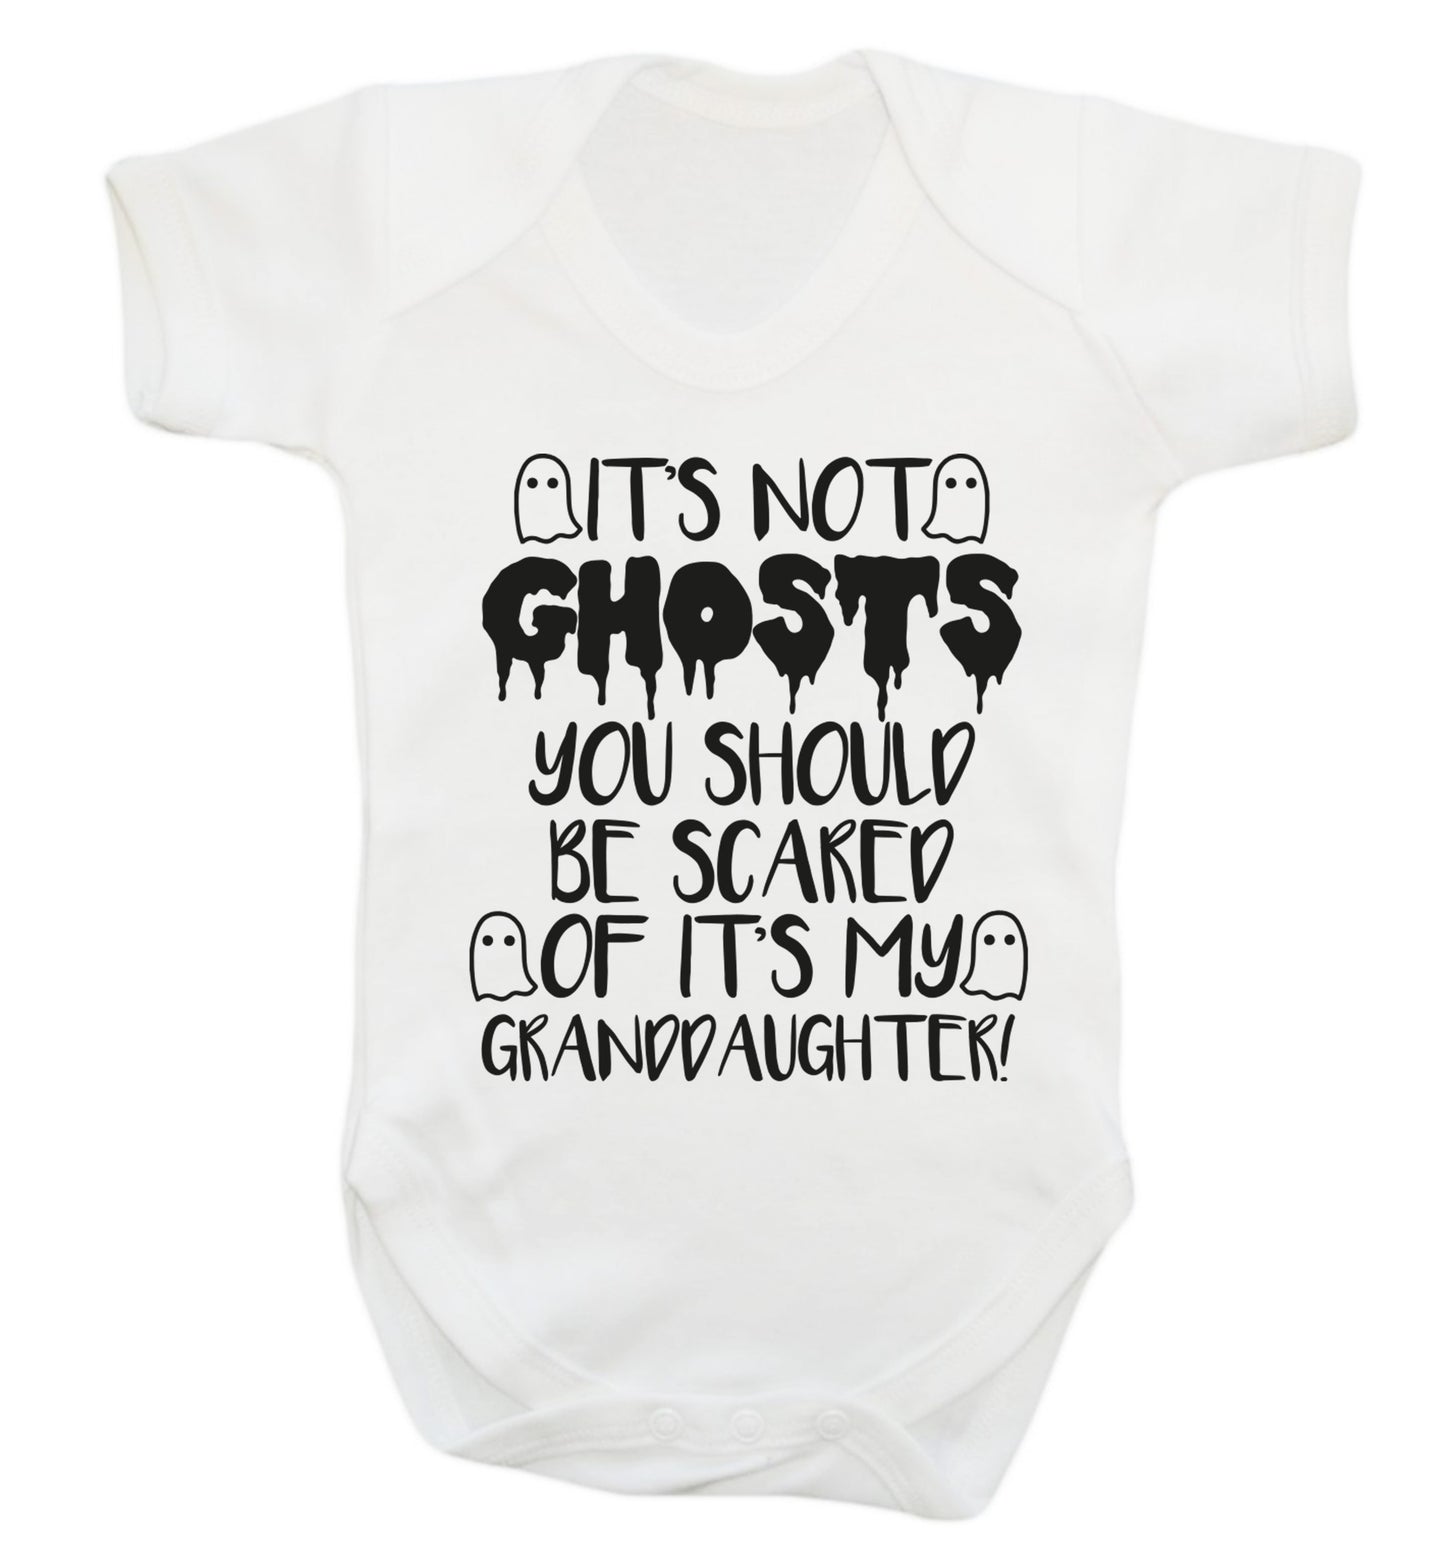 It's not ghosts you should be scared of it's my granddaughter! Baby Vest white 18-24 months